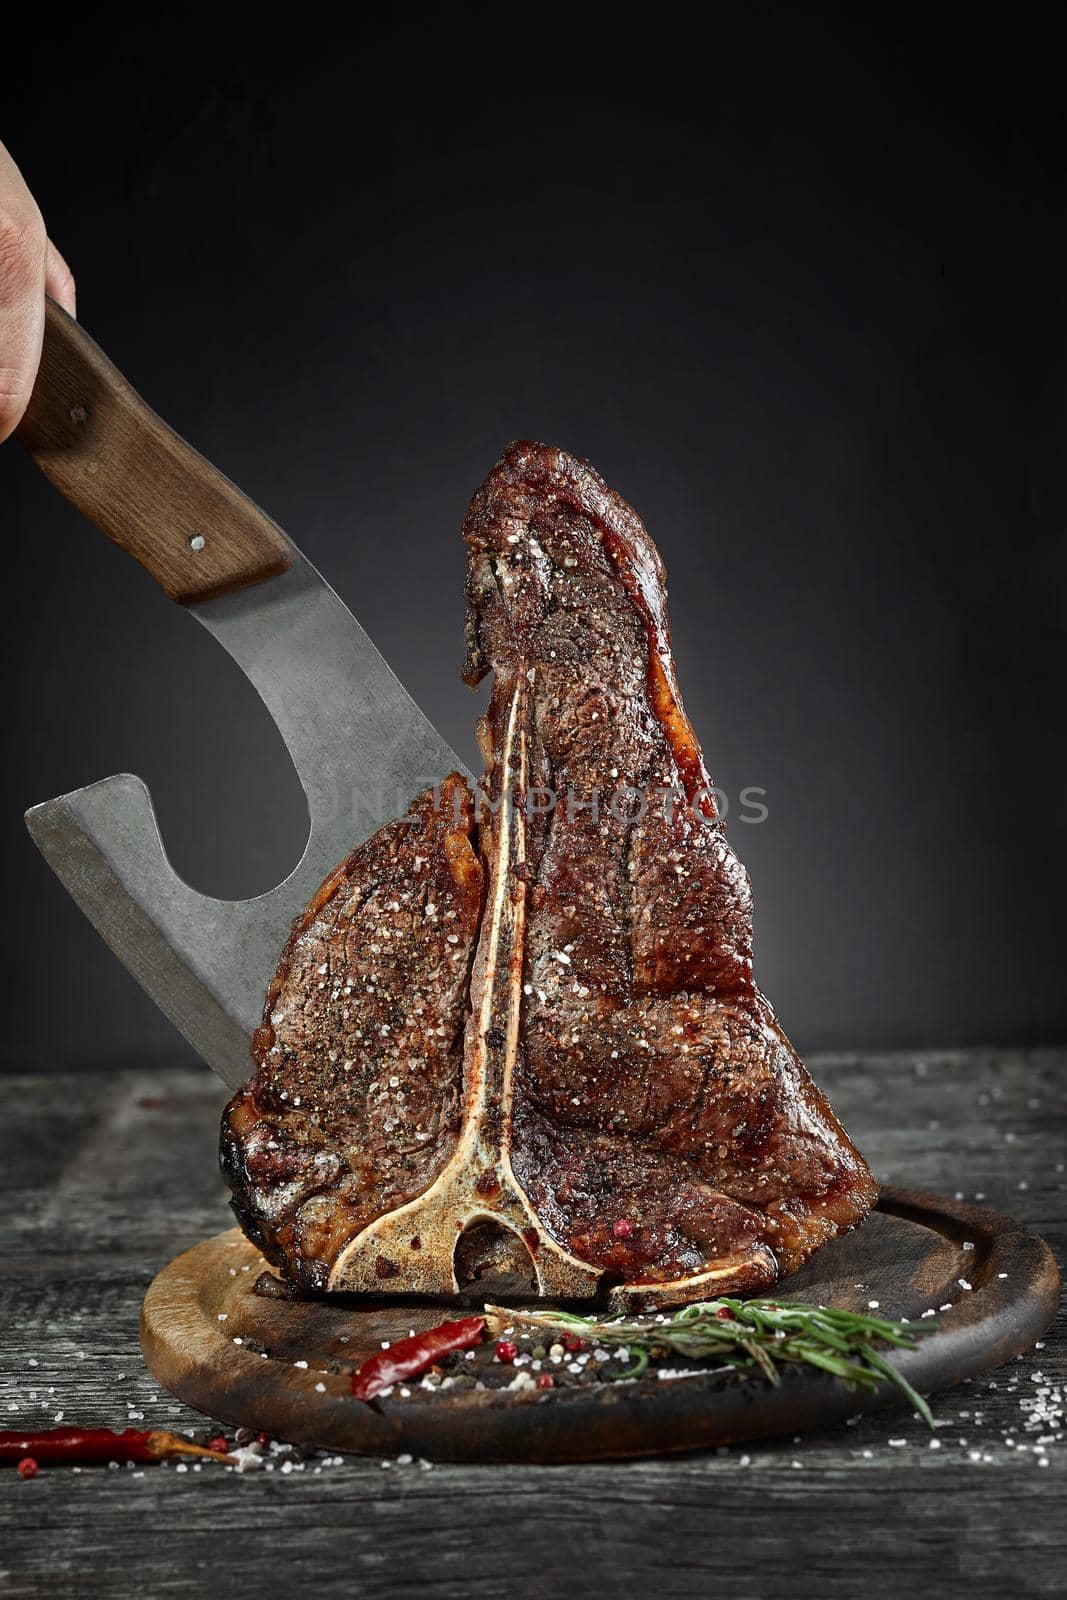 Grilled T-Bone Steak with salt,pepper and a kitchen ax on cutting board on dark background. Copy space.